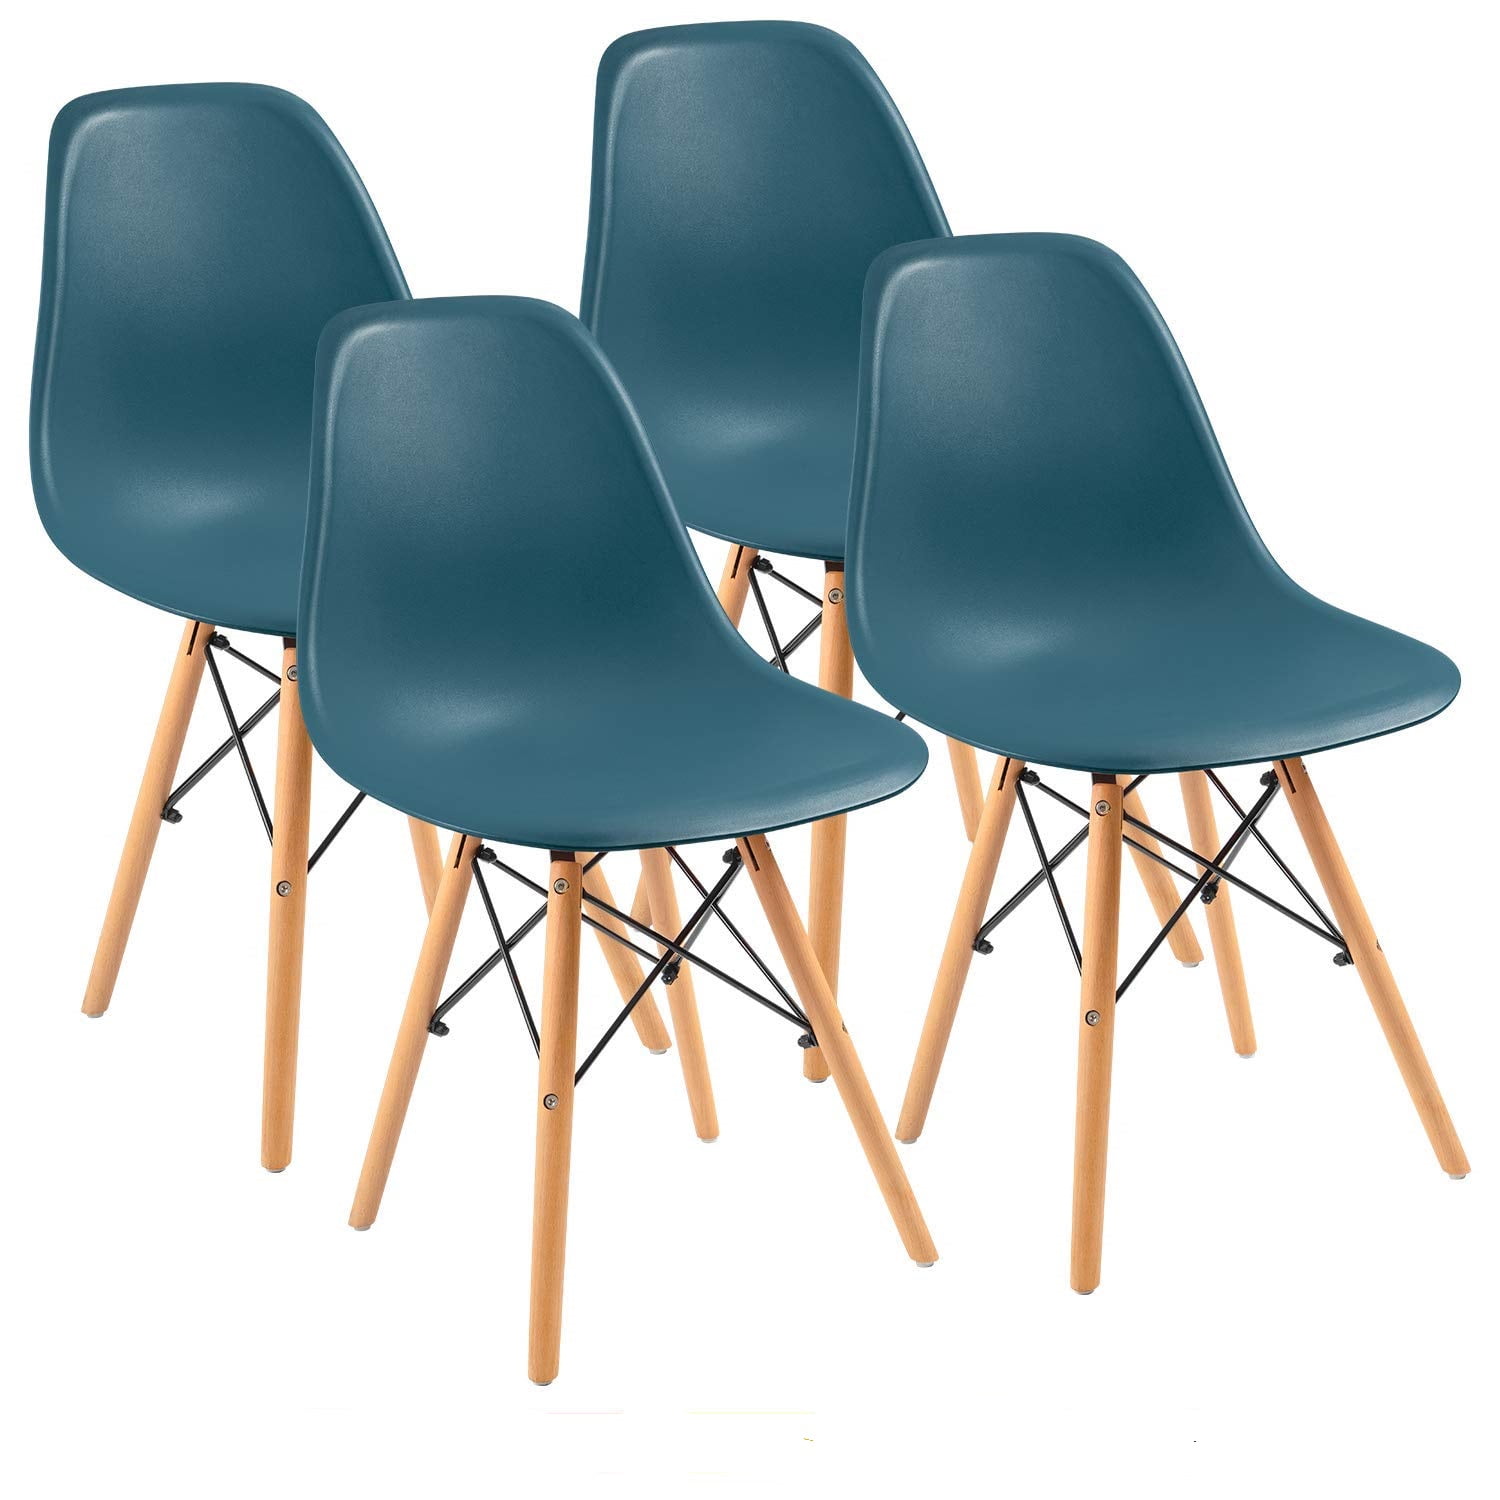 Walnew Dining Chairs Pre Assembled, Fully Assembled Dining Room Chairs